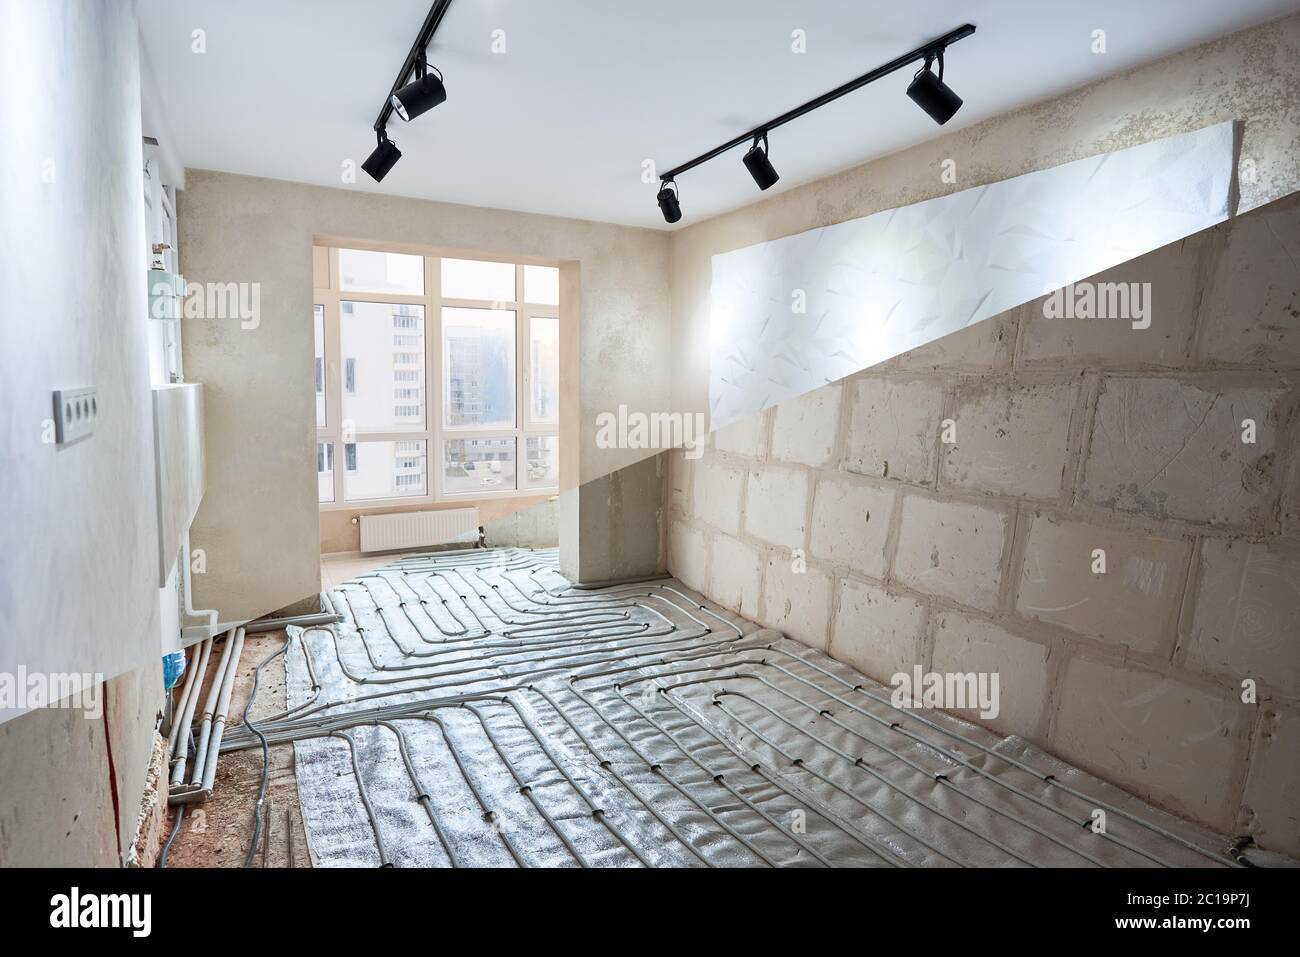 Comparison of new renovated room with large window and old place with underfloor heating pipes. Modern apartment before and after restoration. Concept of home renovation and refurbishment. Stock Photo